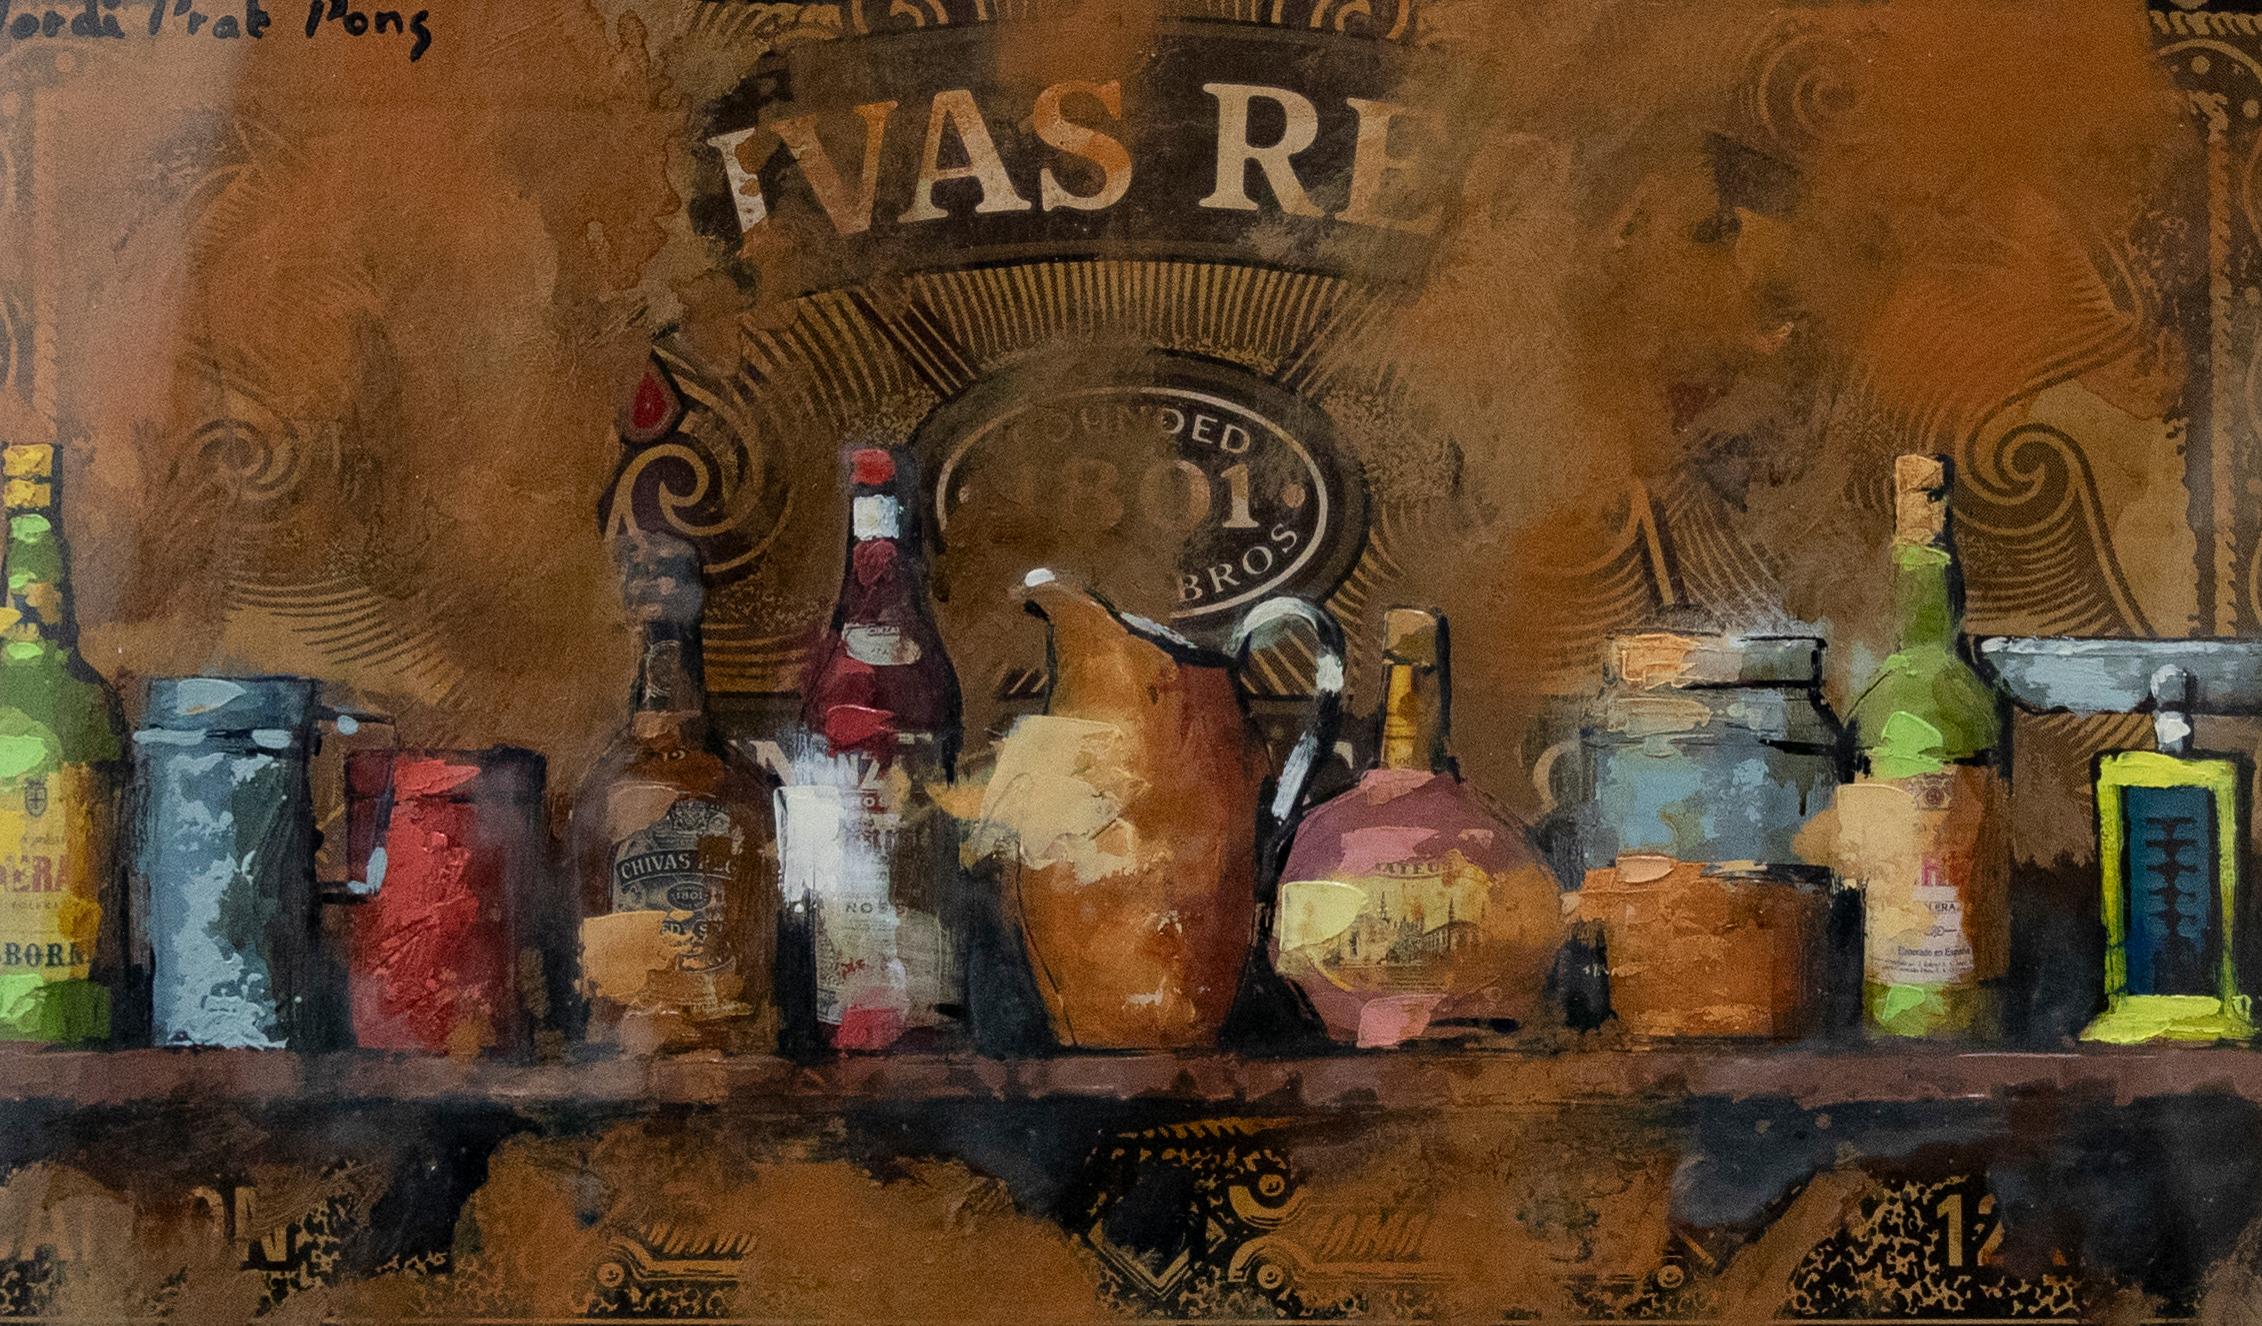 A quirky mix media study of spirit bottles on a shelf. Signed to the upper left 'Jordi Prat Pons'. Presented in a contemporary gilt-effect frame with a cream card mount. Fixed to the reverse of the frame is a signed certificate of authenticity and